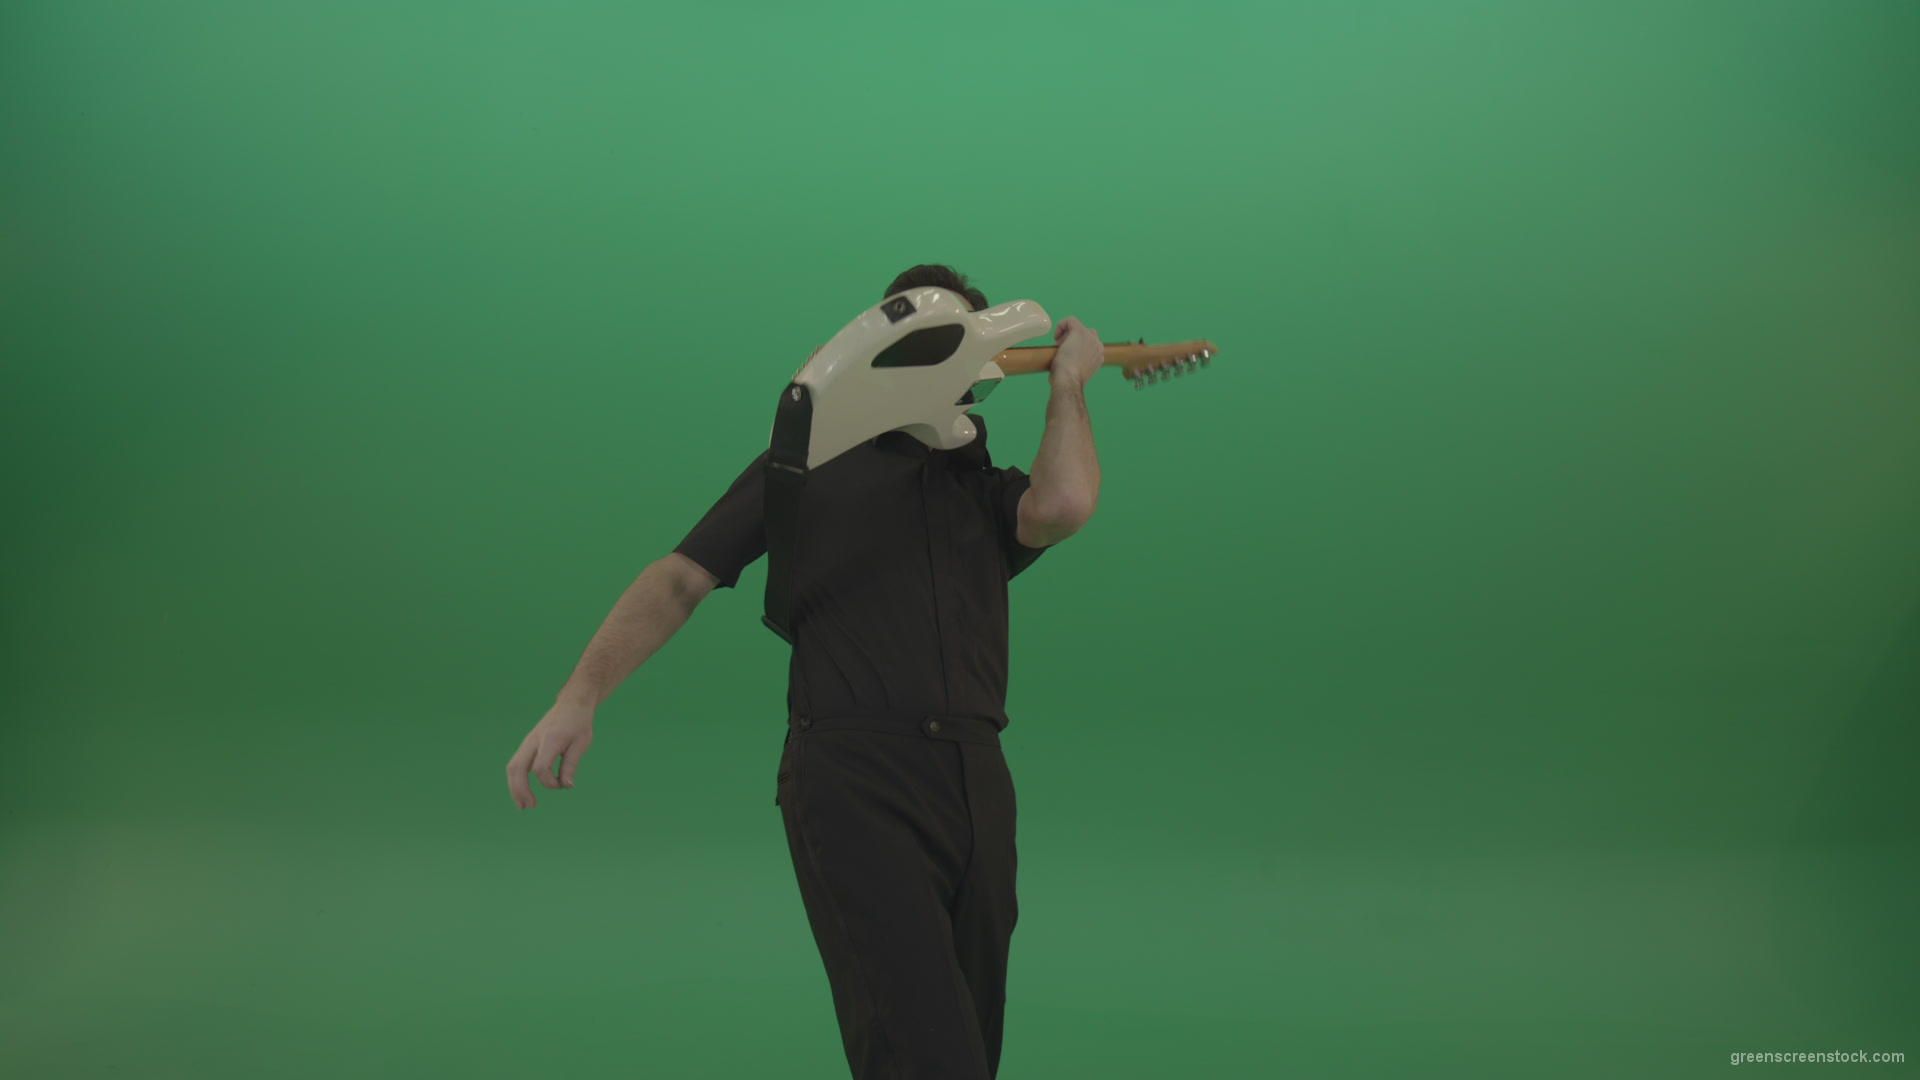 Man-in-black-costume-virtuoso-play-white-electro-rythm-guitar-isolated-on-green-screen_008 Green Screen Stock